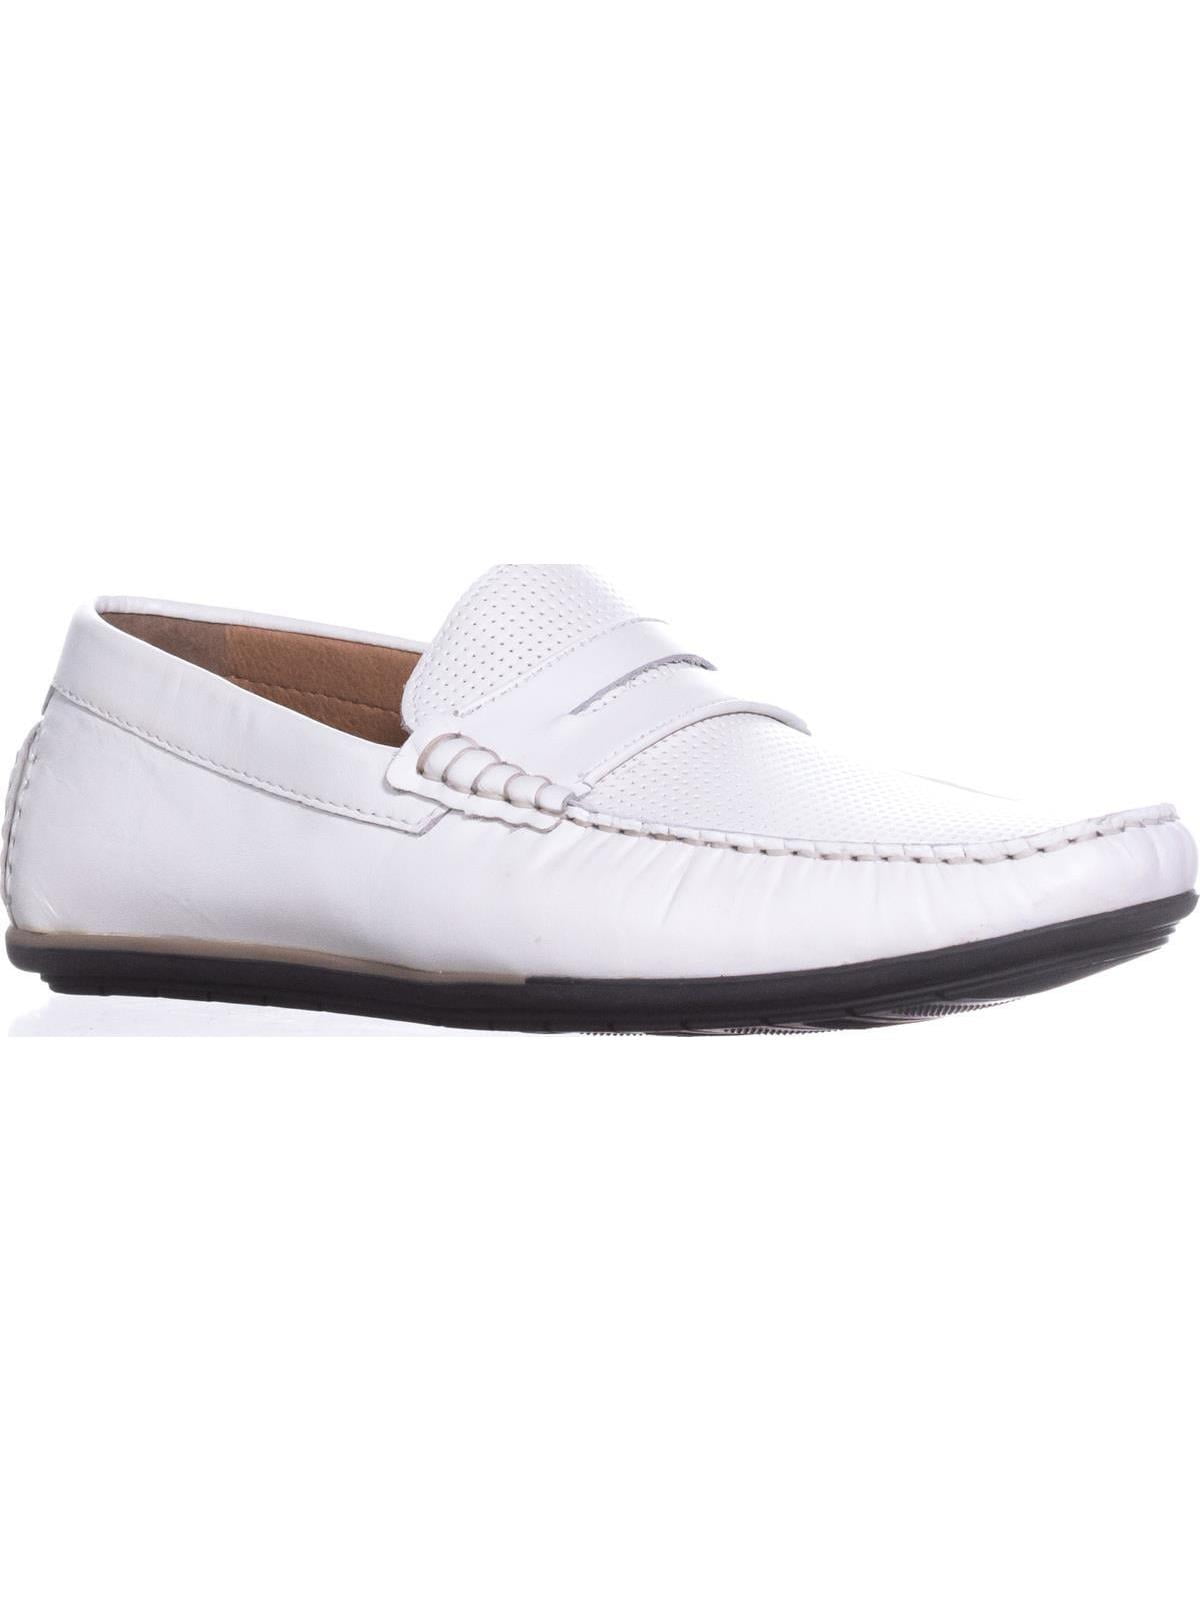 Womens A35 Mens Will Perforated Penny Loafers, White, 9.5 US - Walmart.com